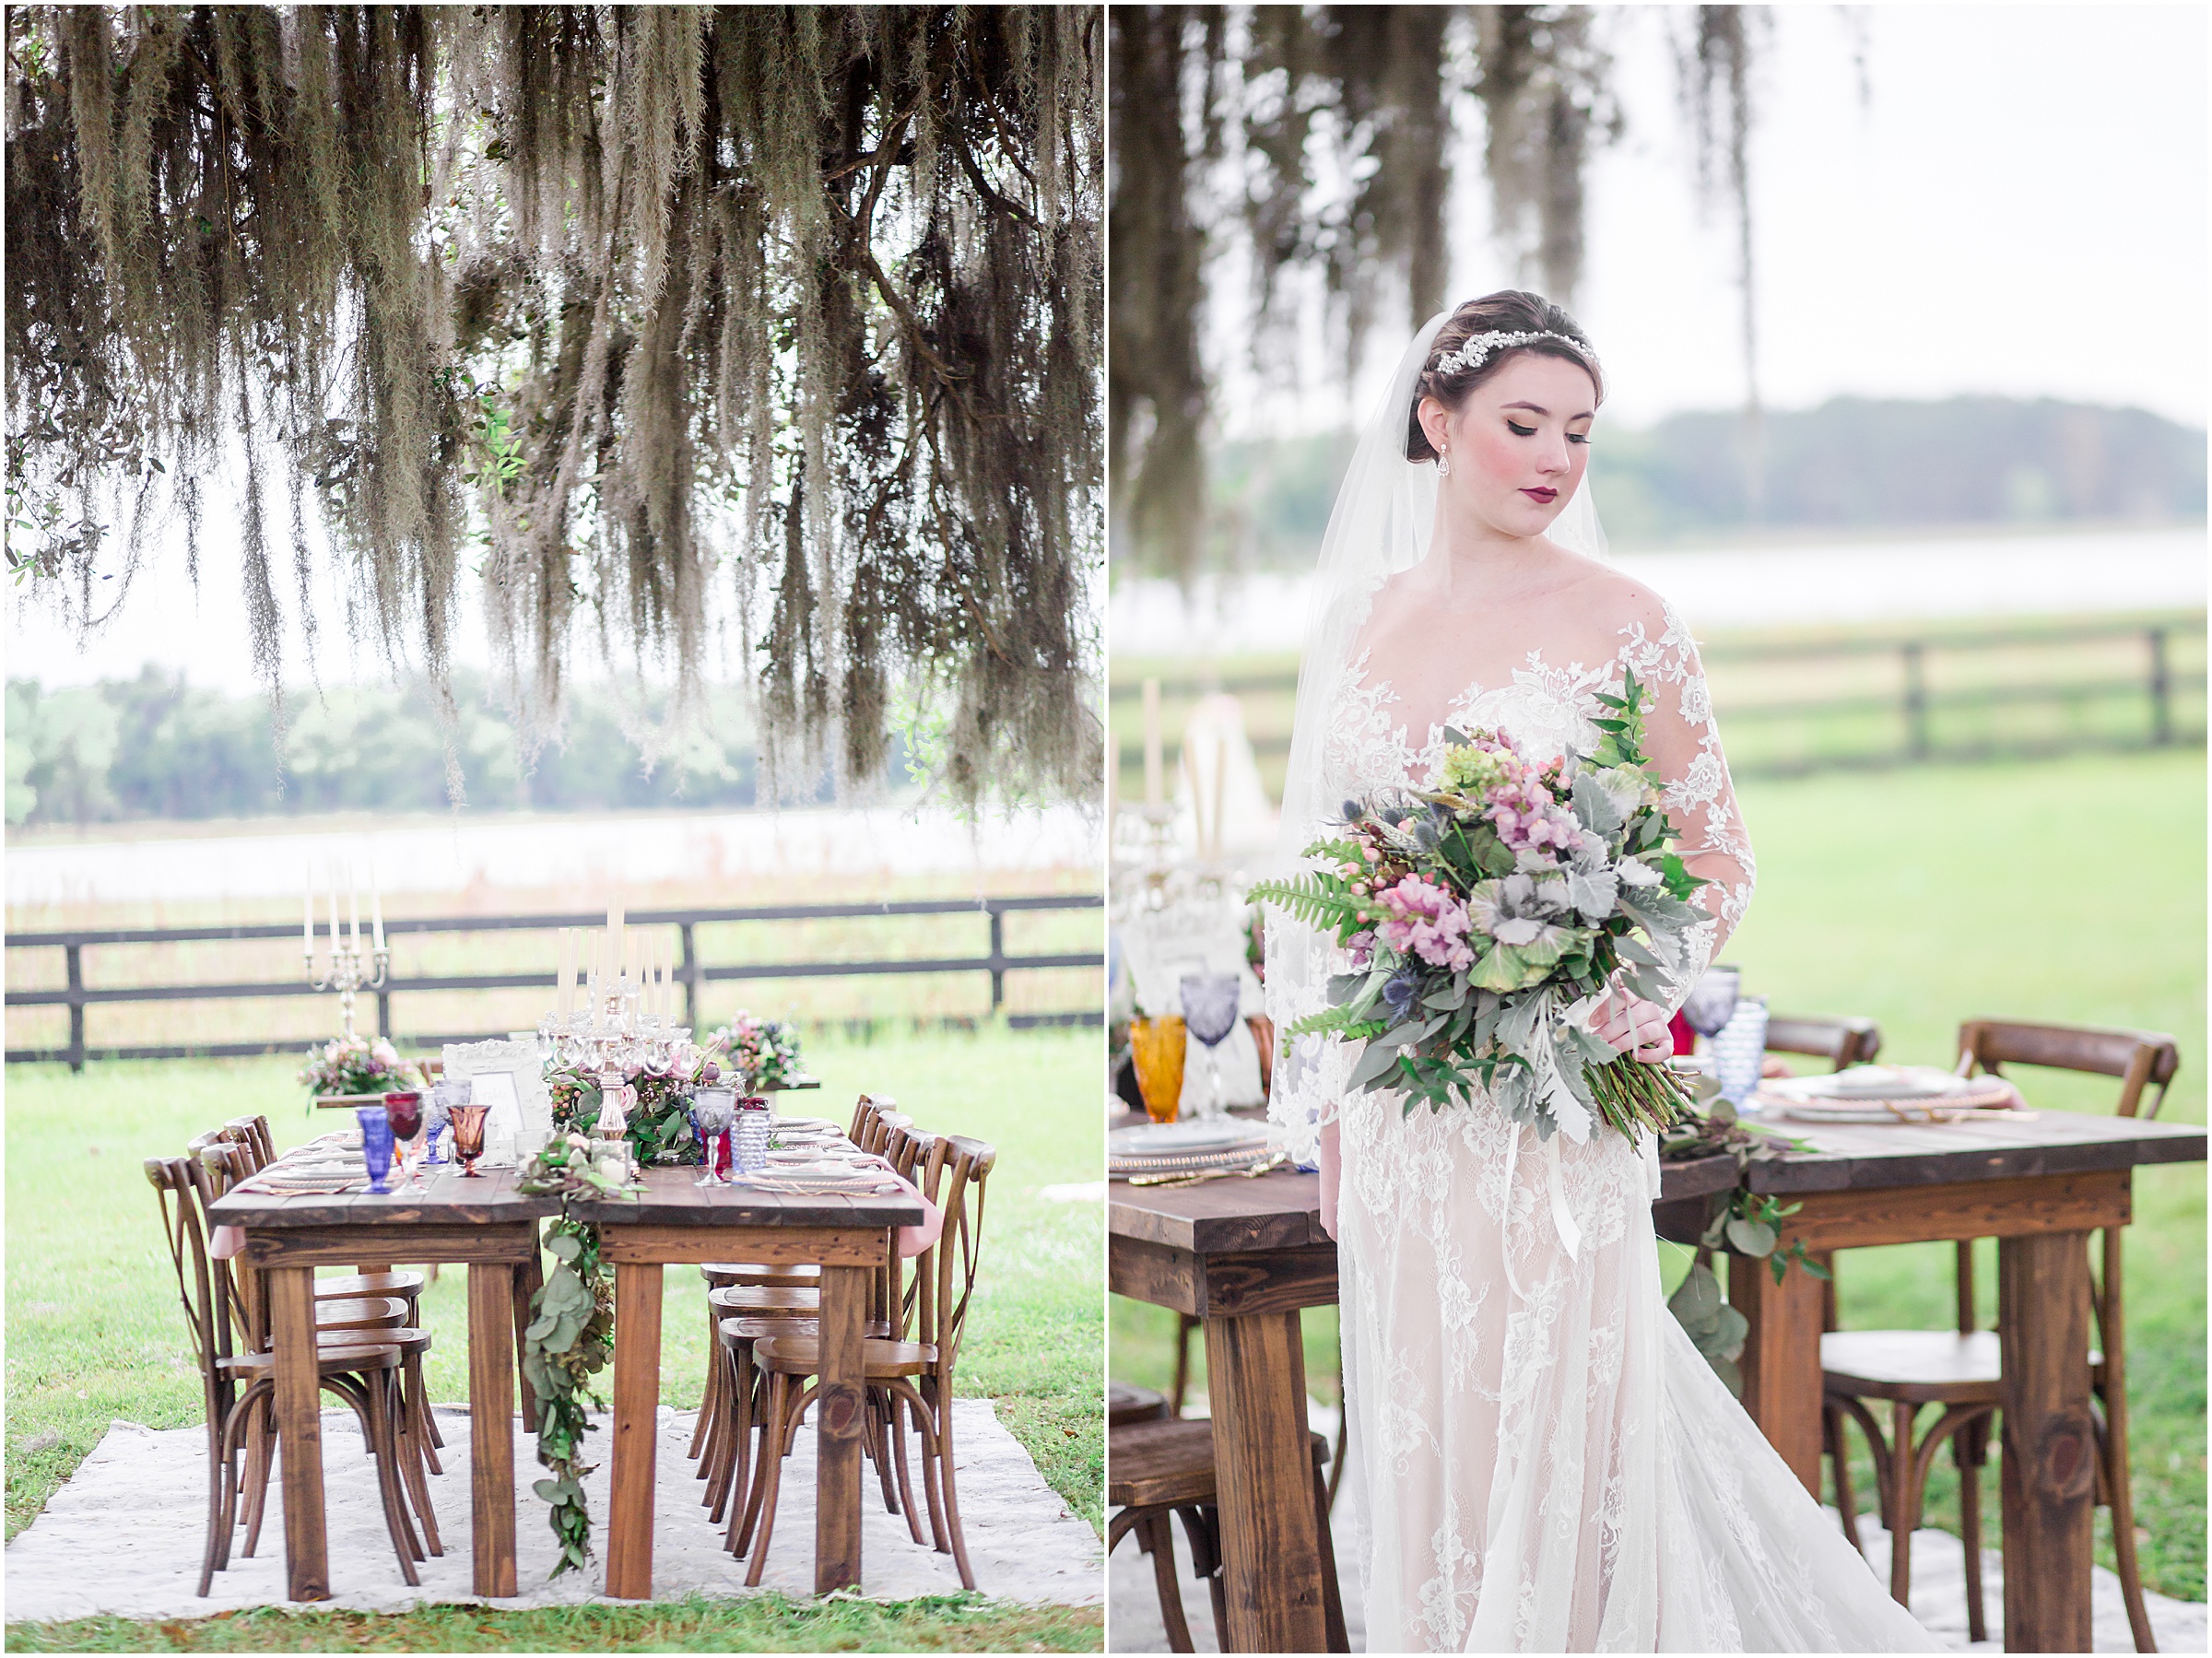 Styled Wedding Shoot at Covington Farms Wedding & Events in Dade City, FL.